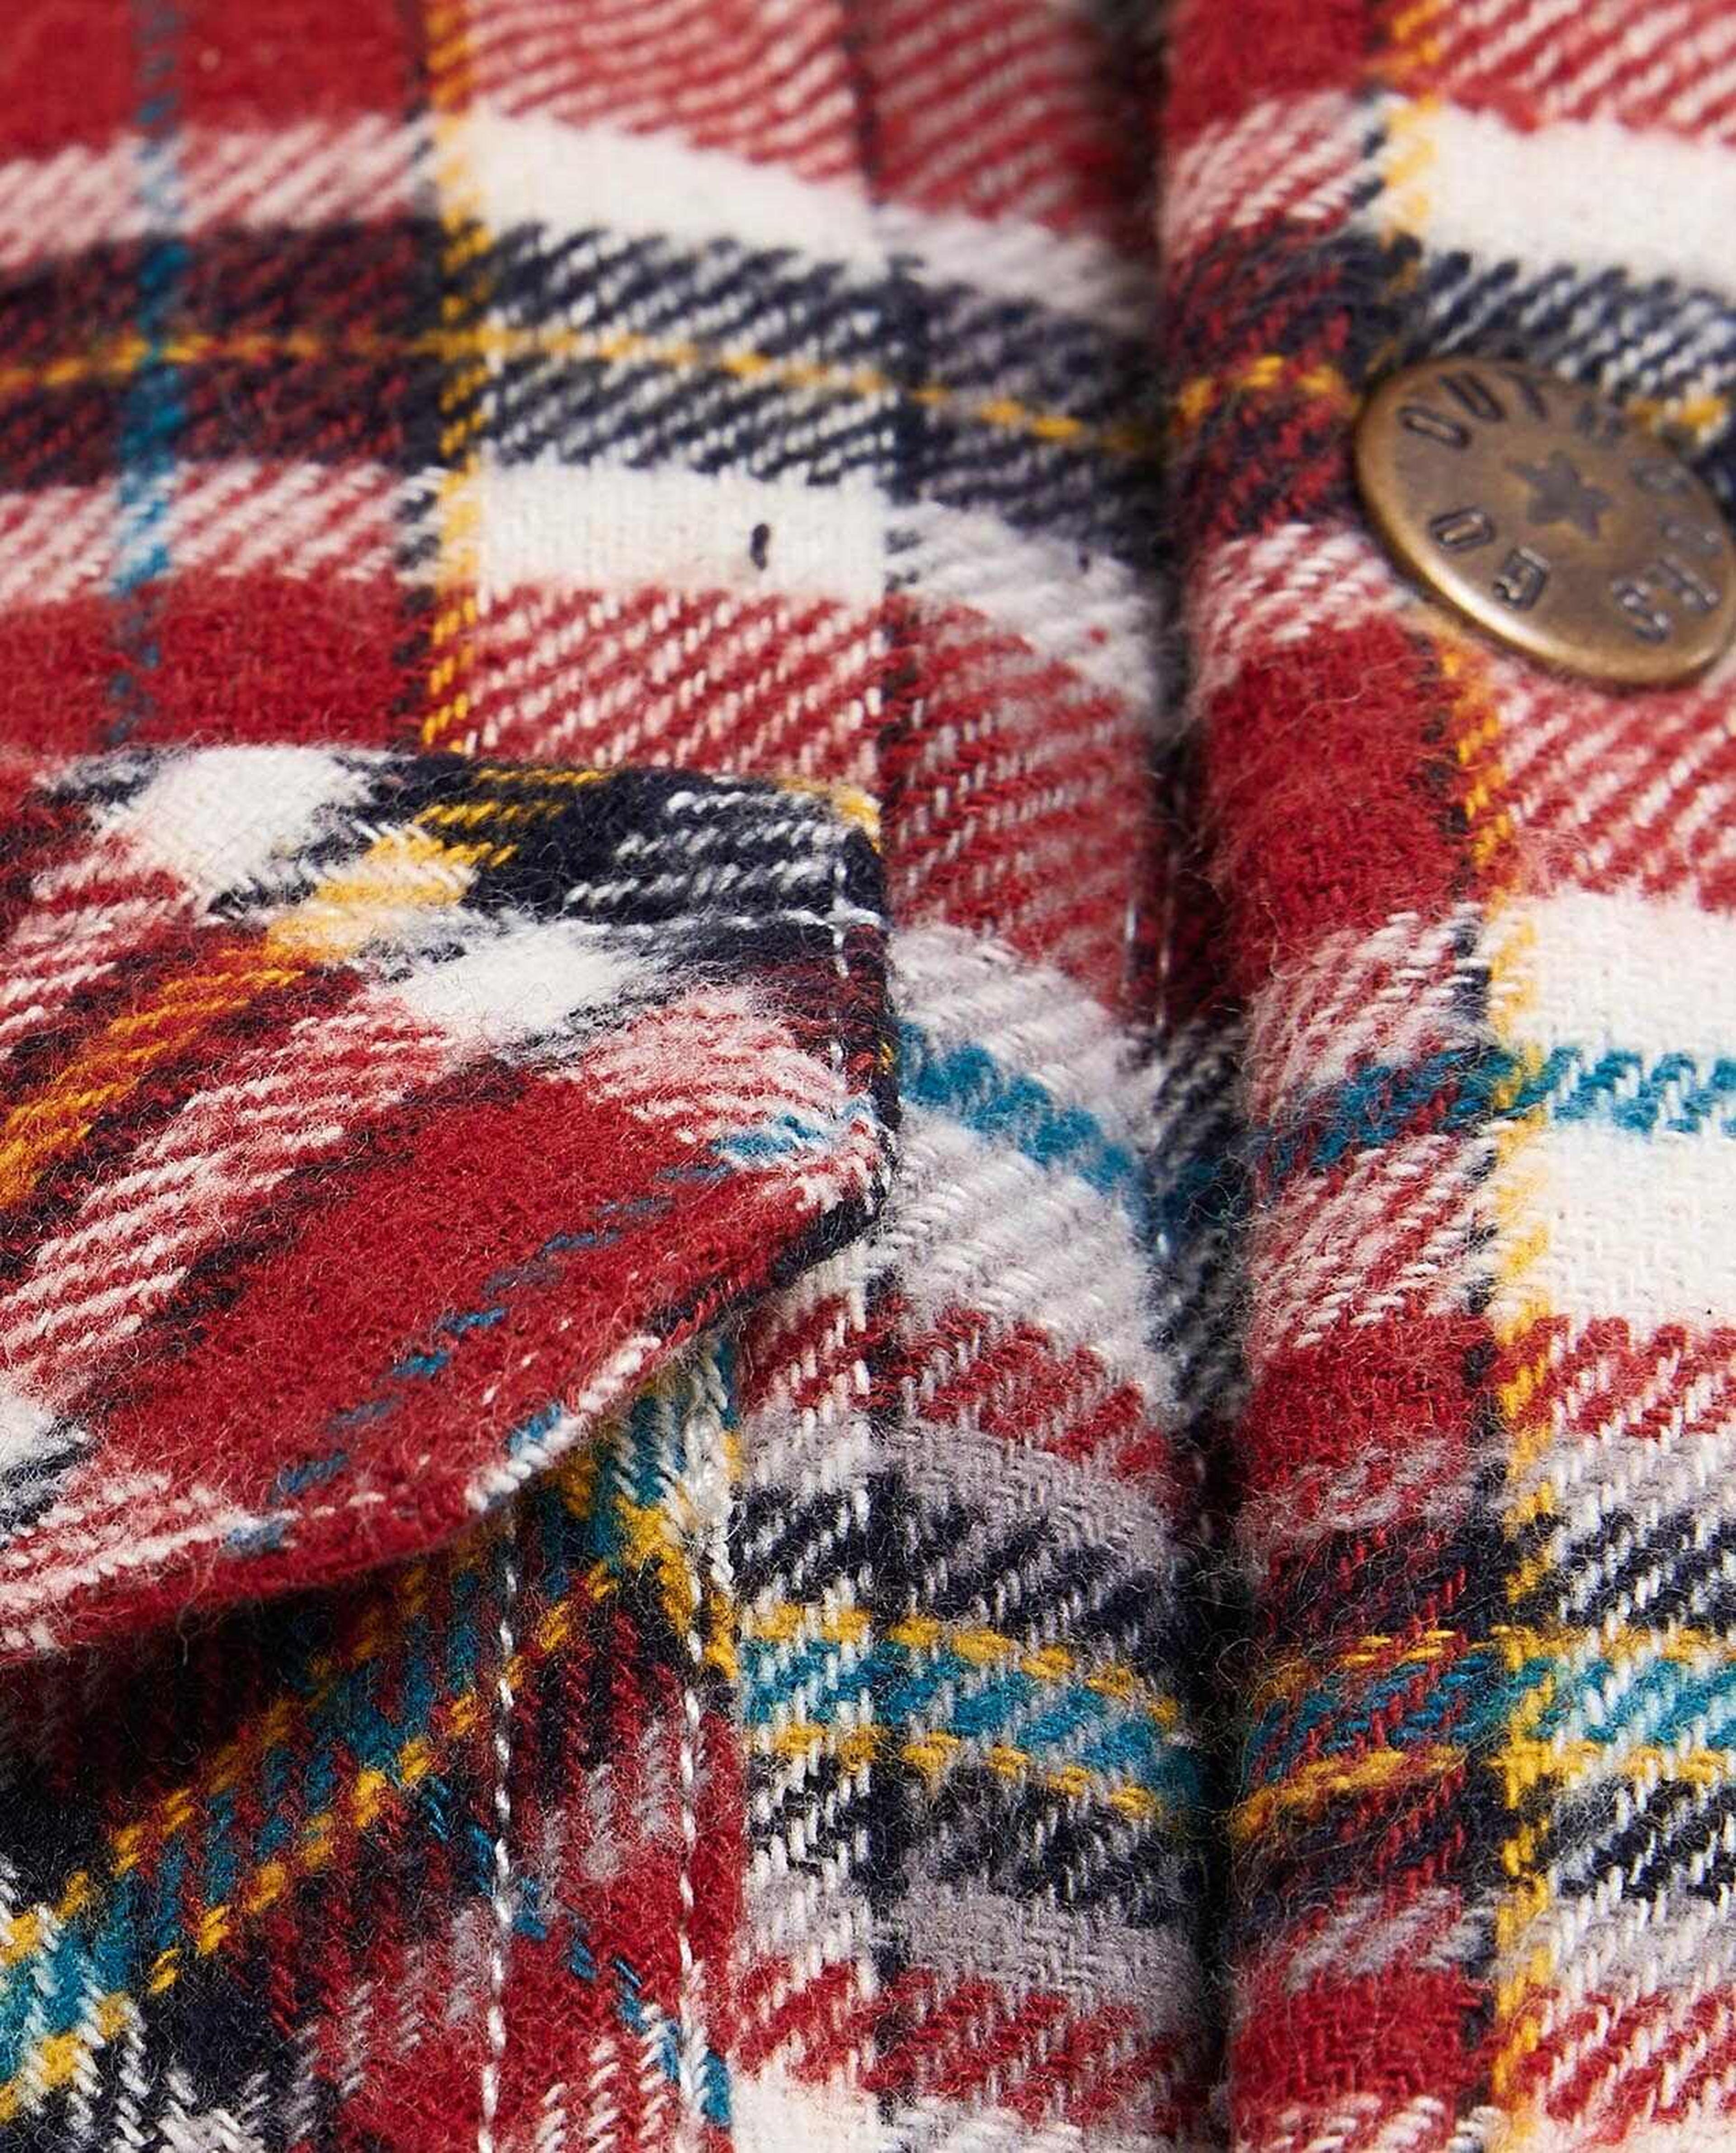 Plaid Shacket with Spread Collar and Long Sleeves